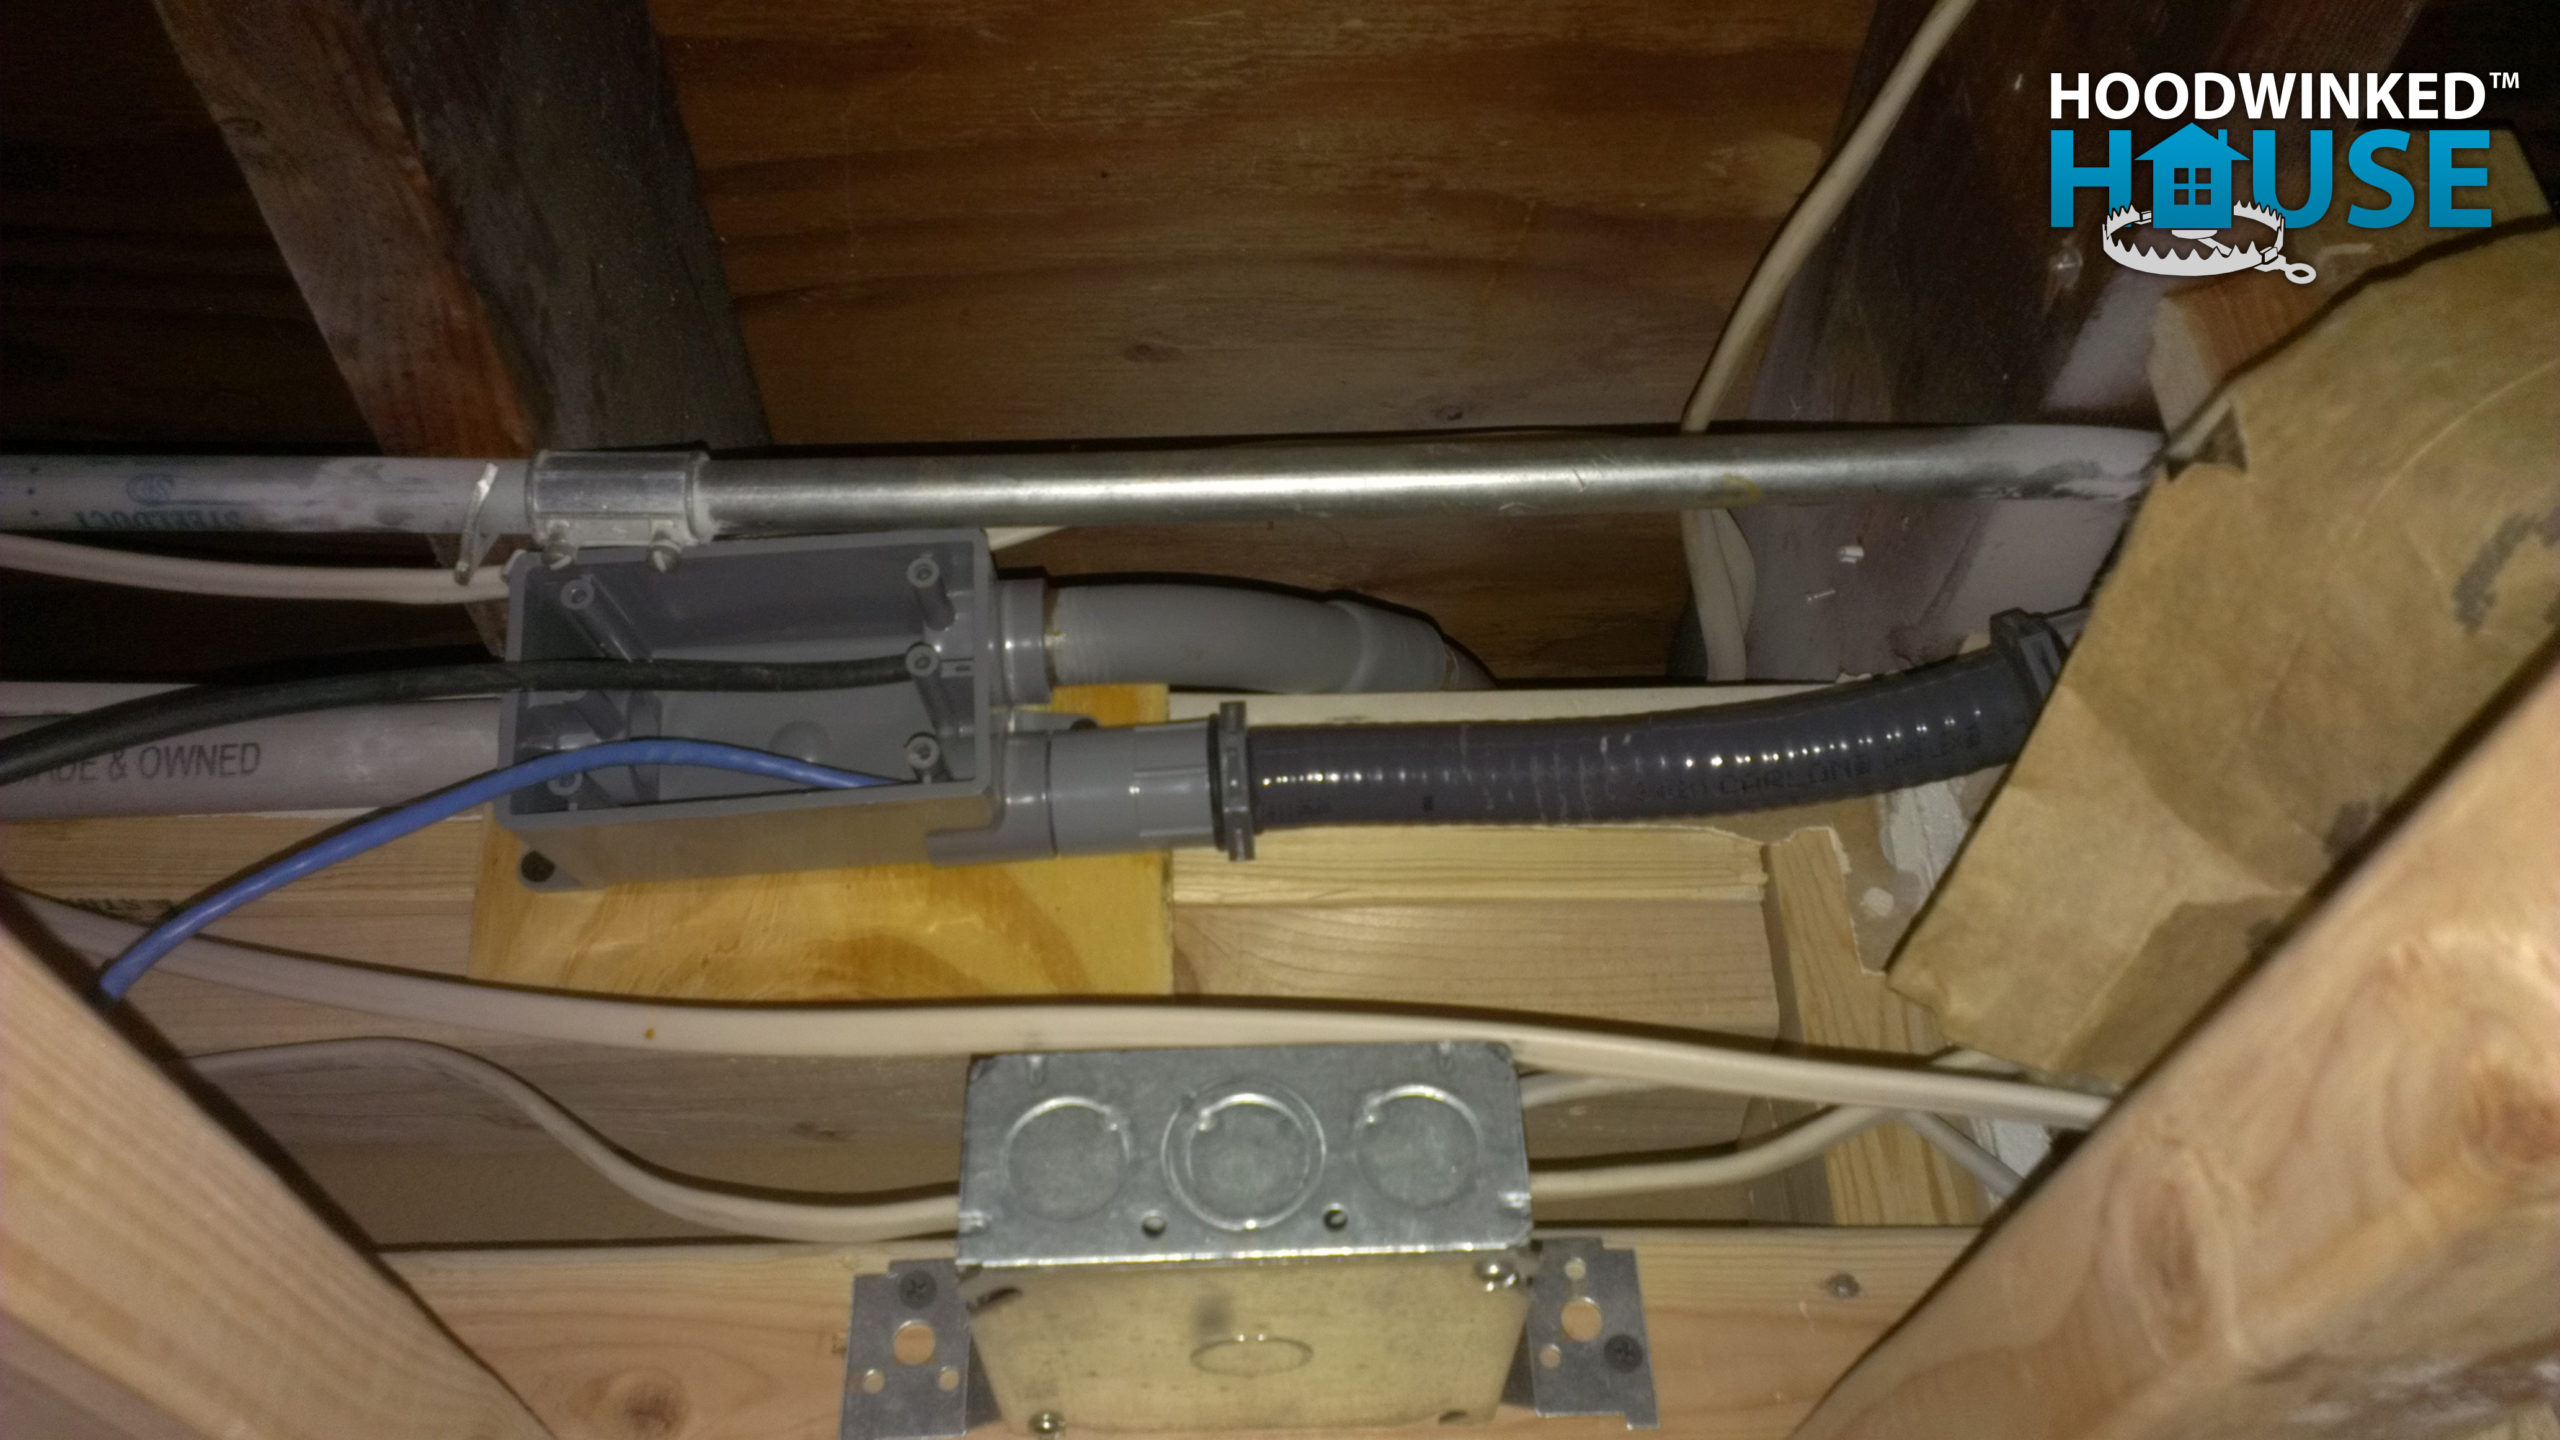 A network conduit in a basement ceiling holds CAT6 and CATV coax cables.